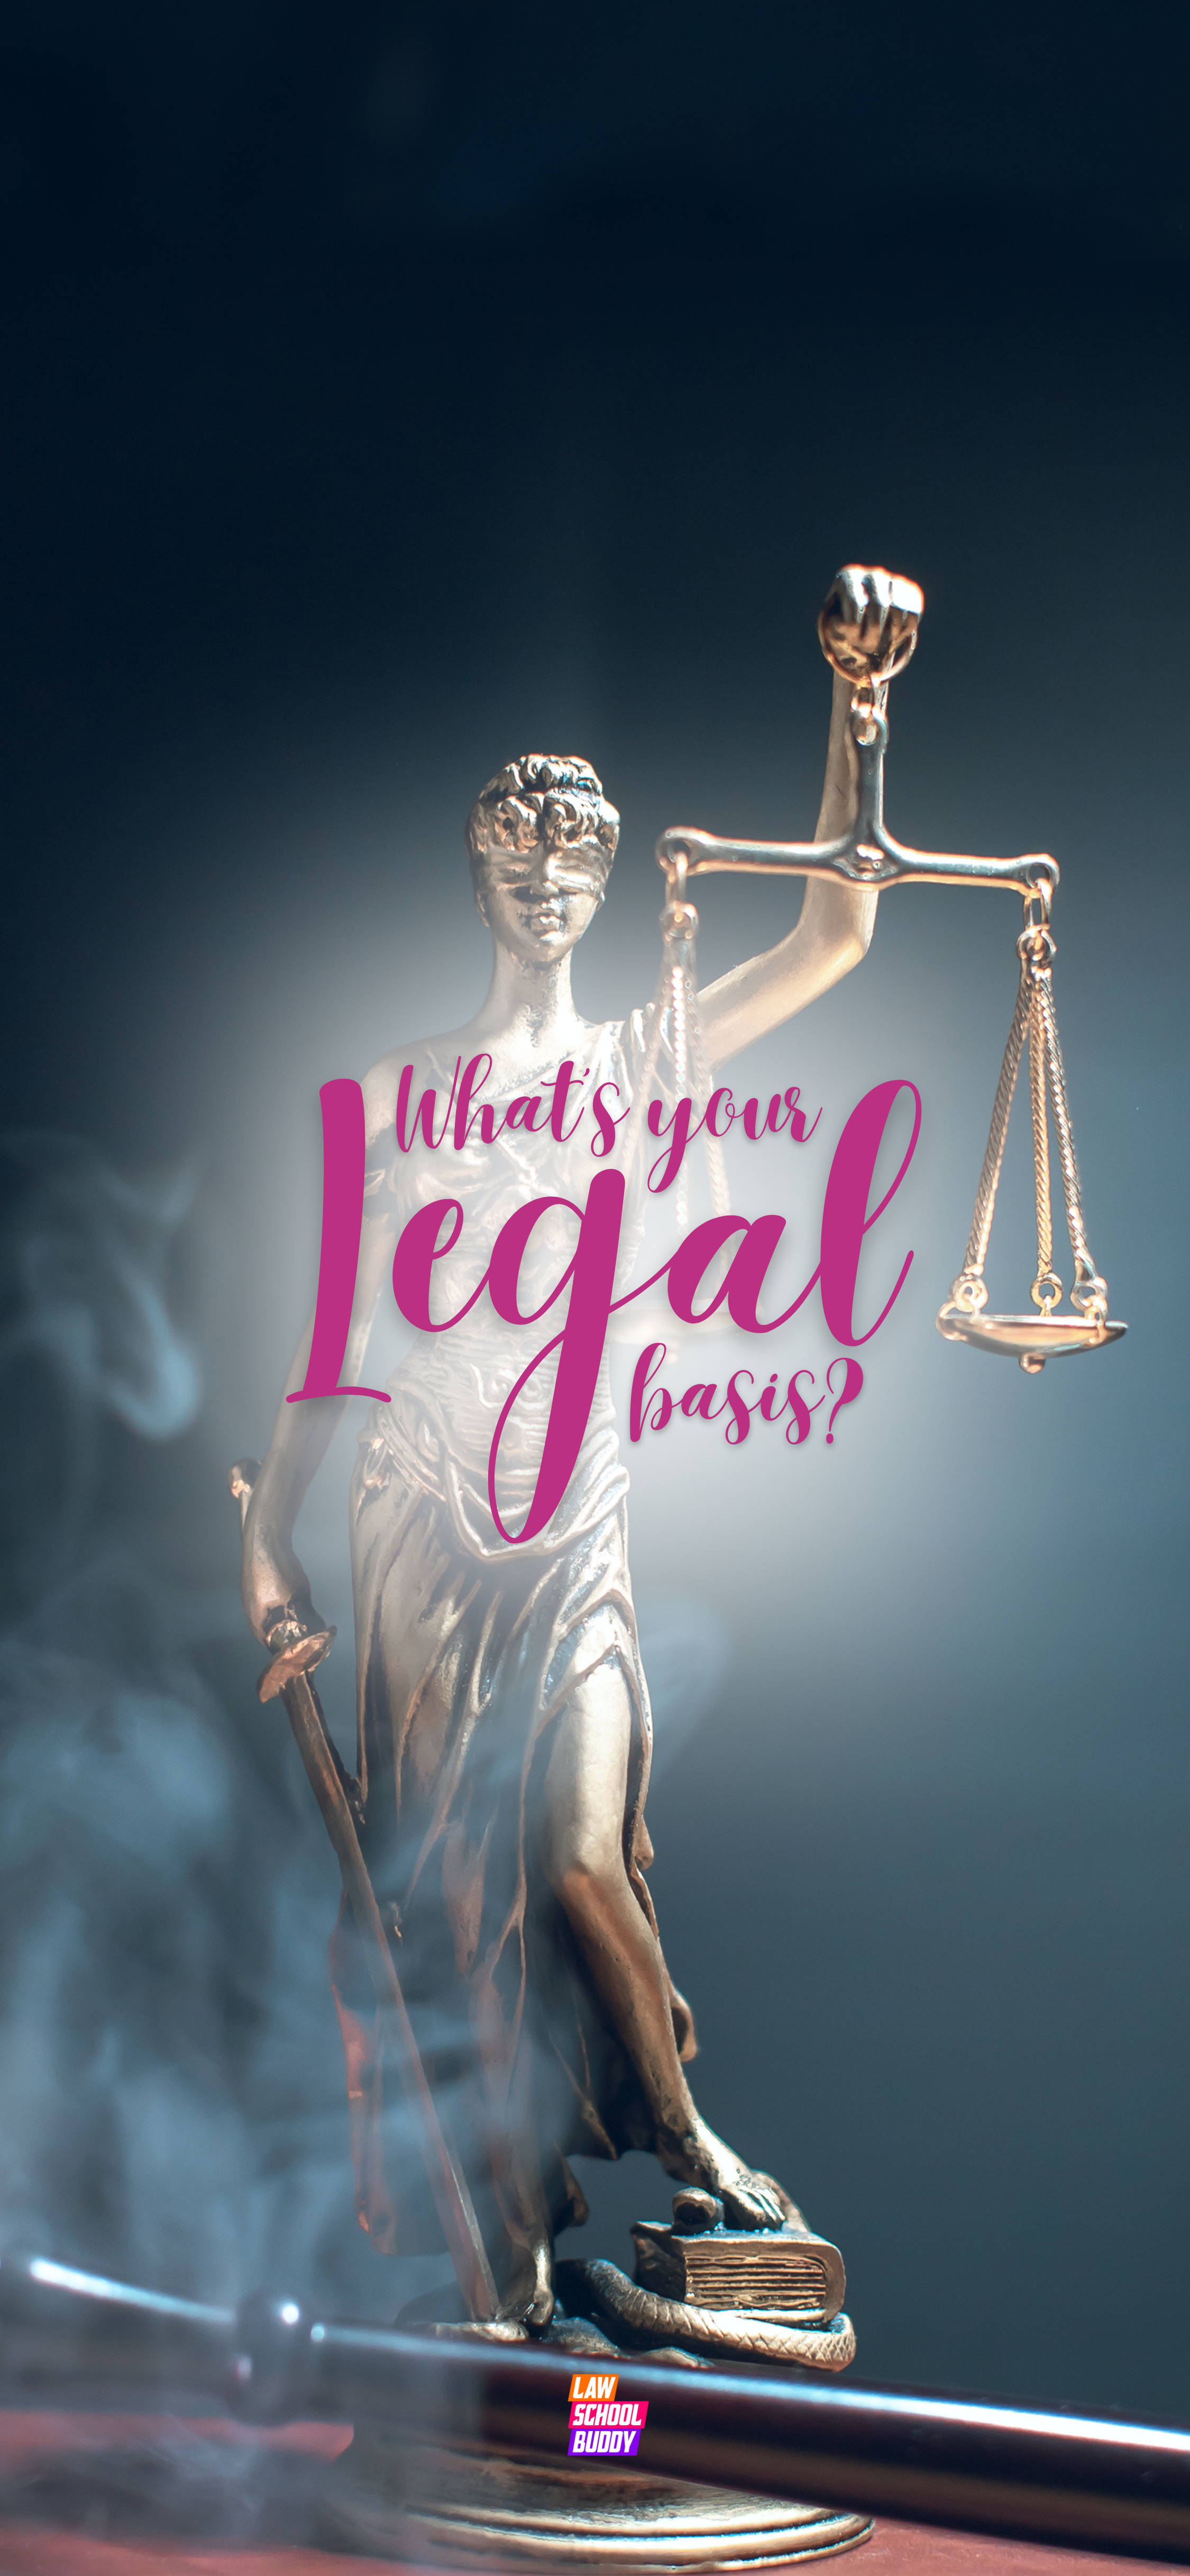 What Is Your Legal Basis Lawyer Wallpaper